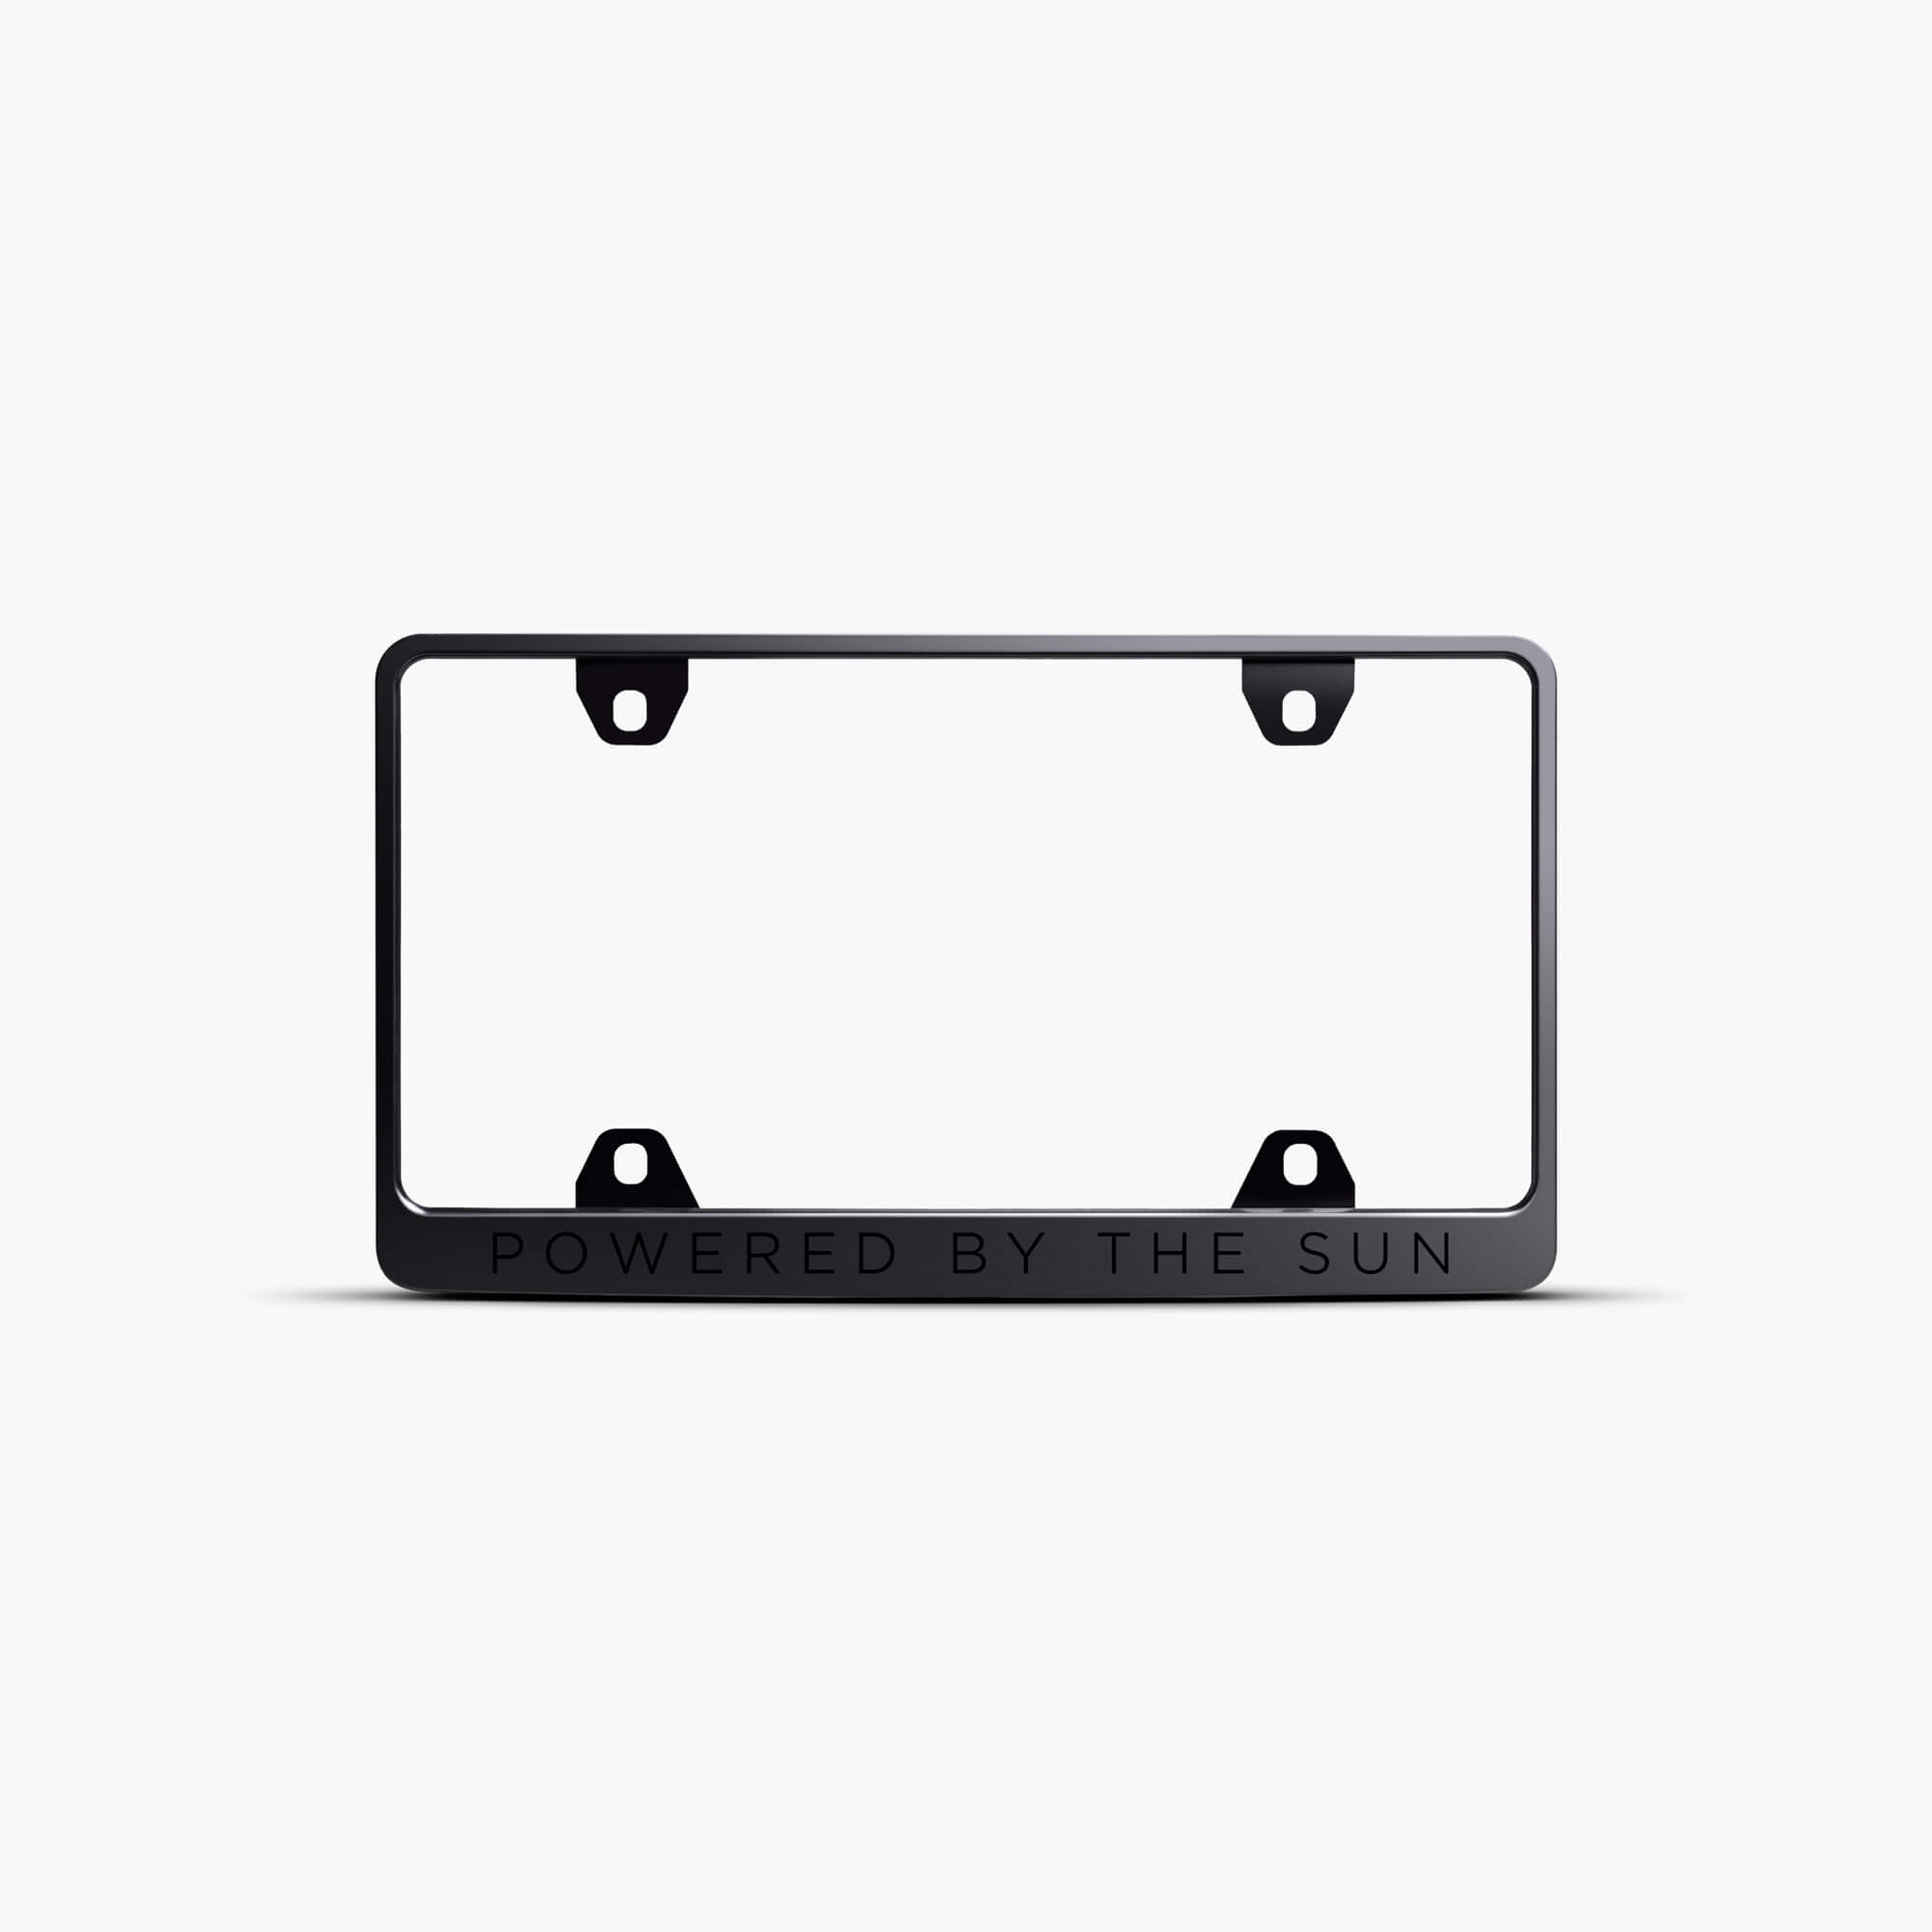 Powered By the Sun License Plate Frame